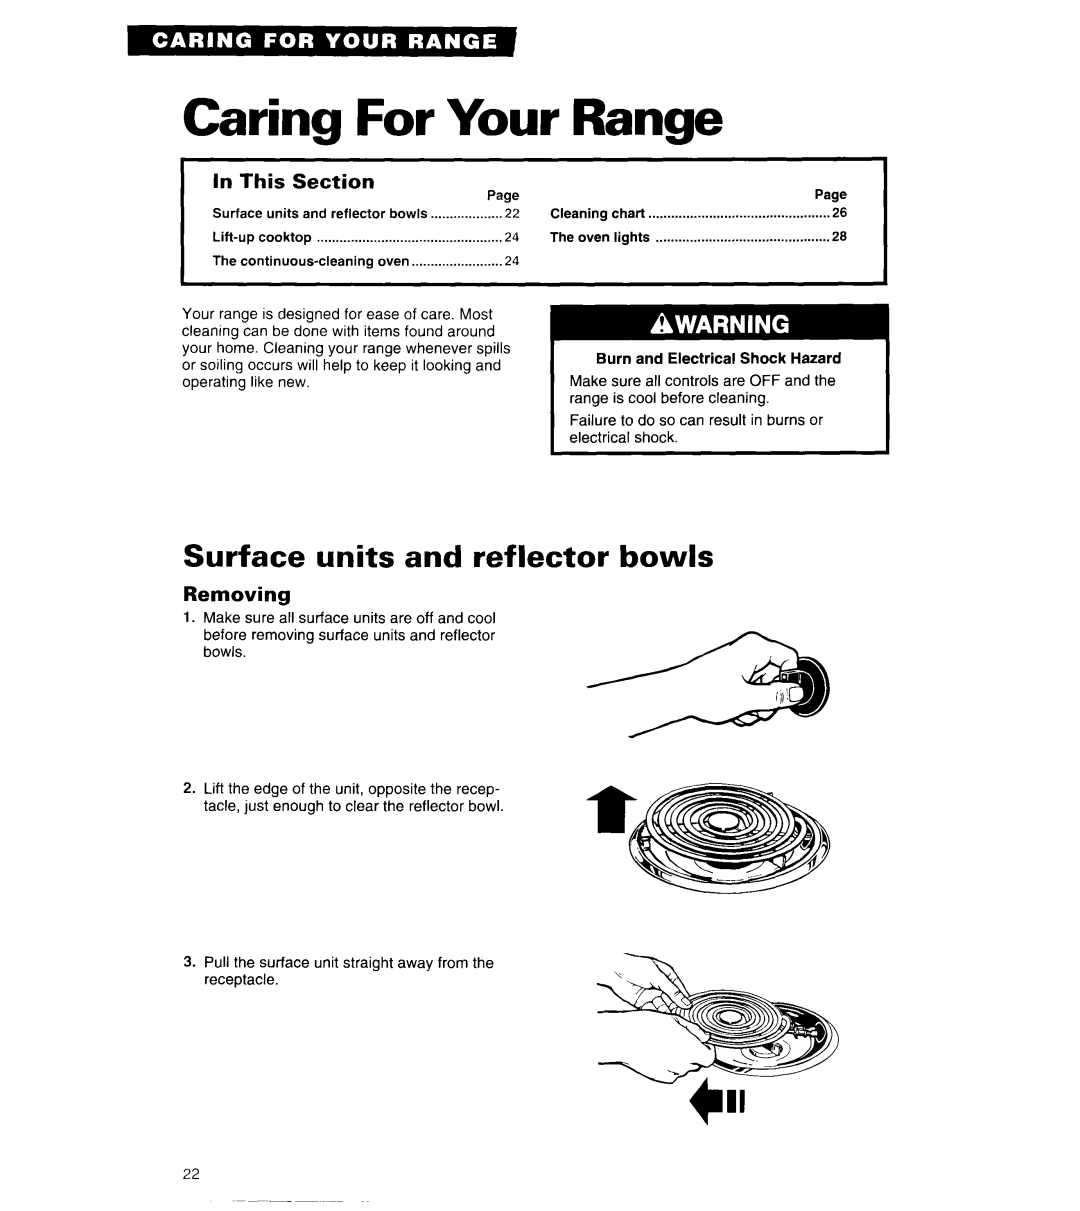 Whirlpool RE960PXY important safety instructions Caring For Your Range, Surface units and reflector bowls 